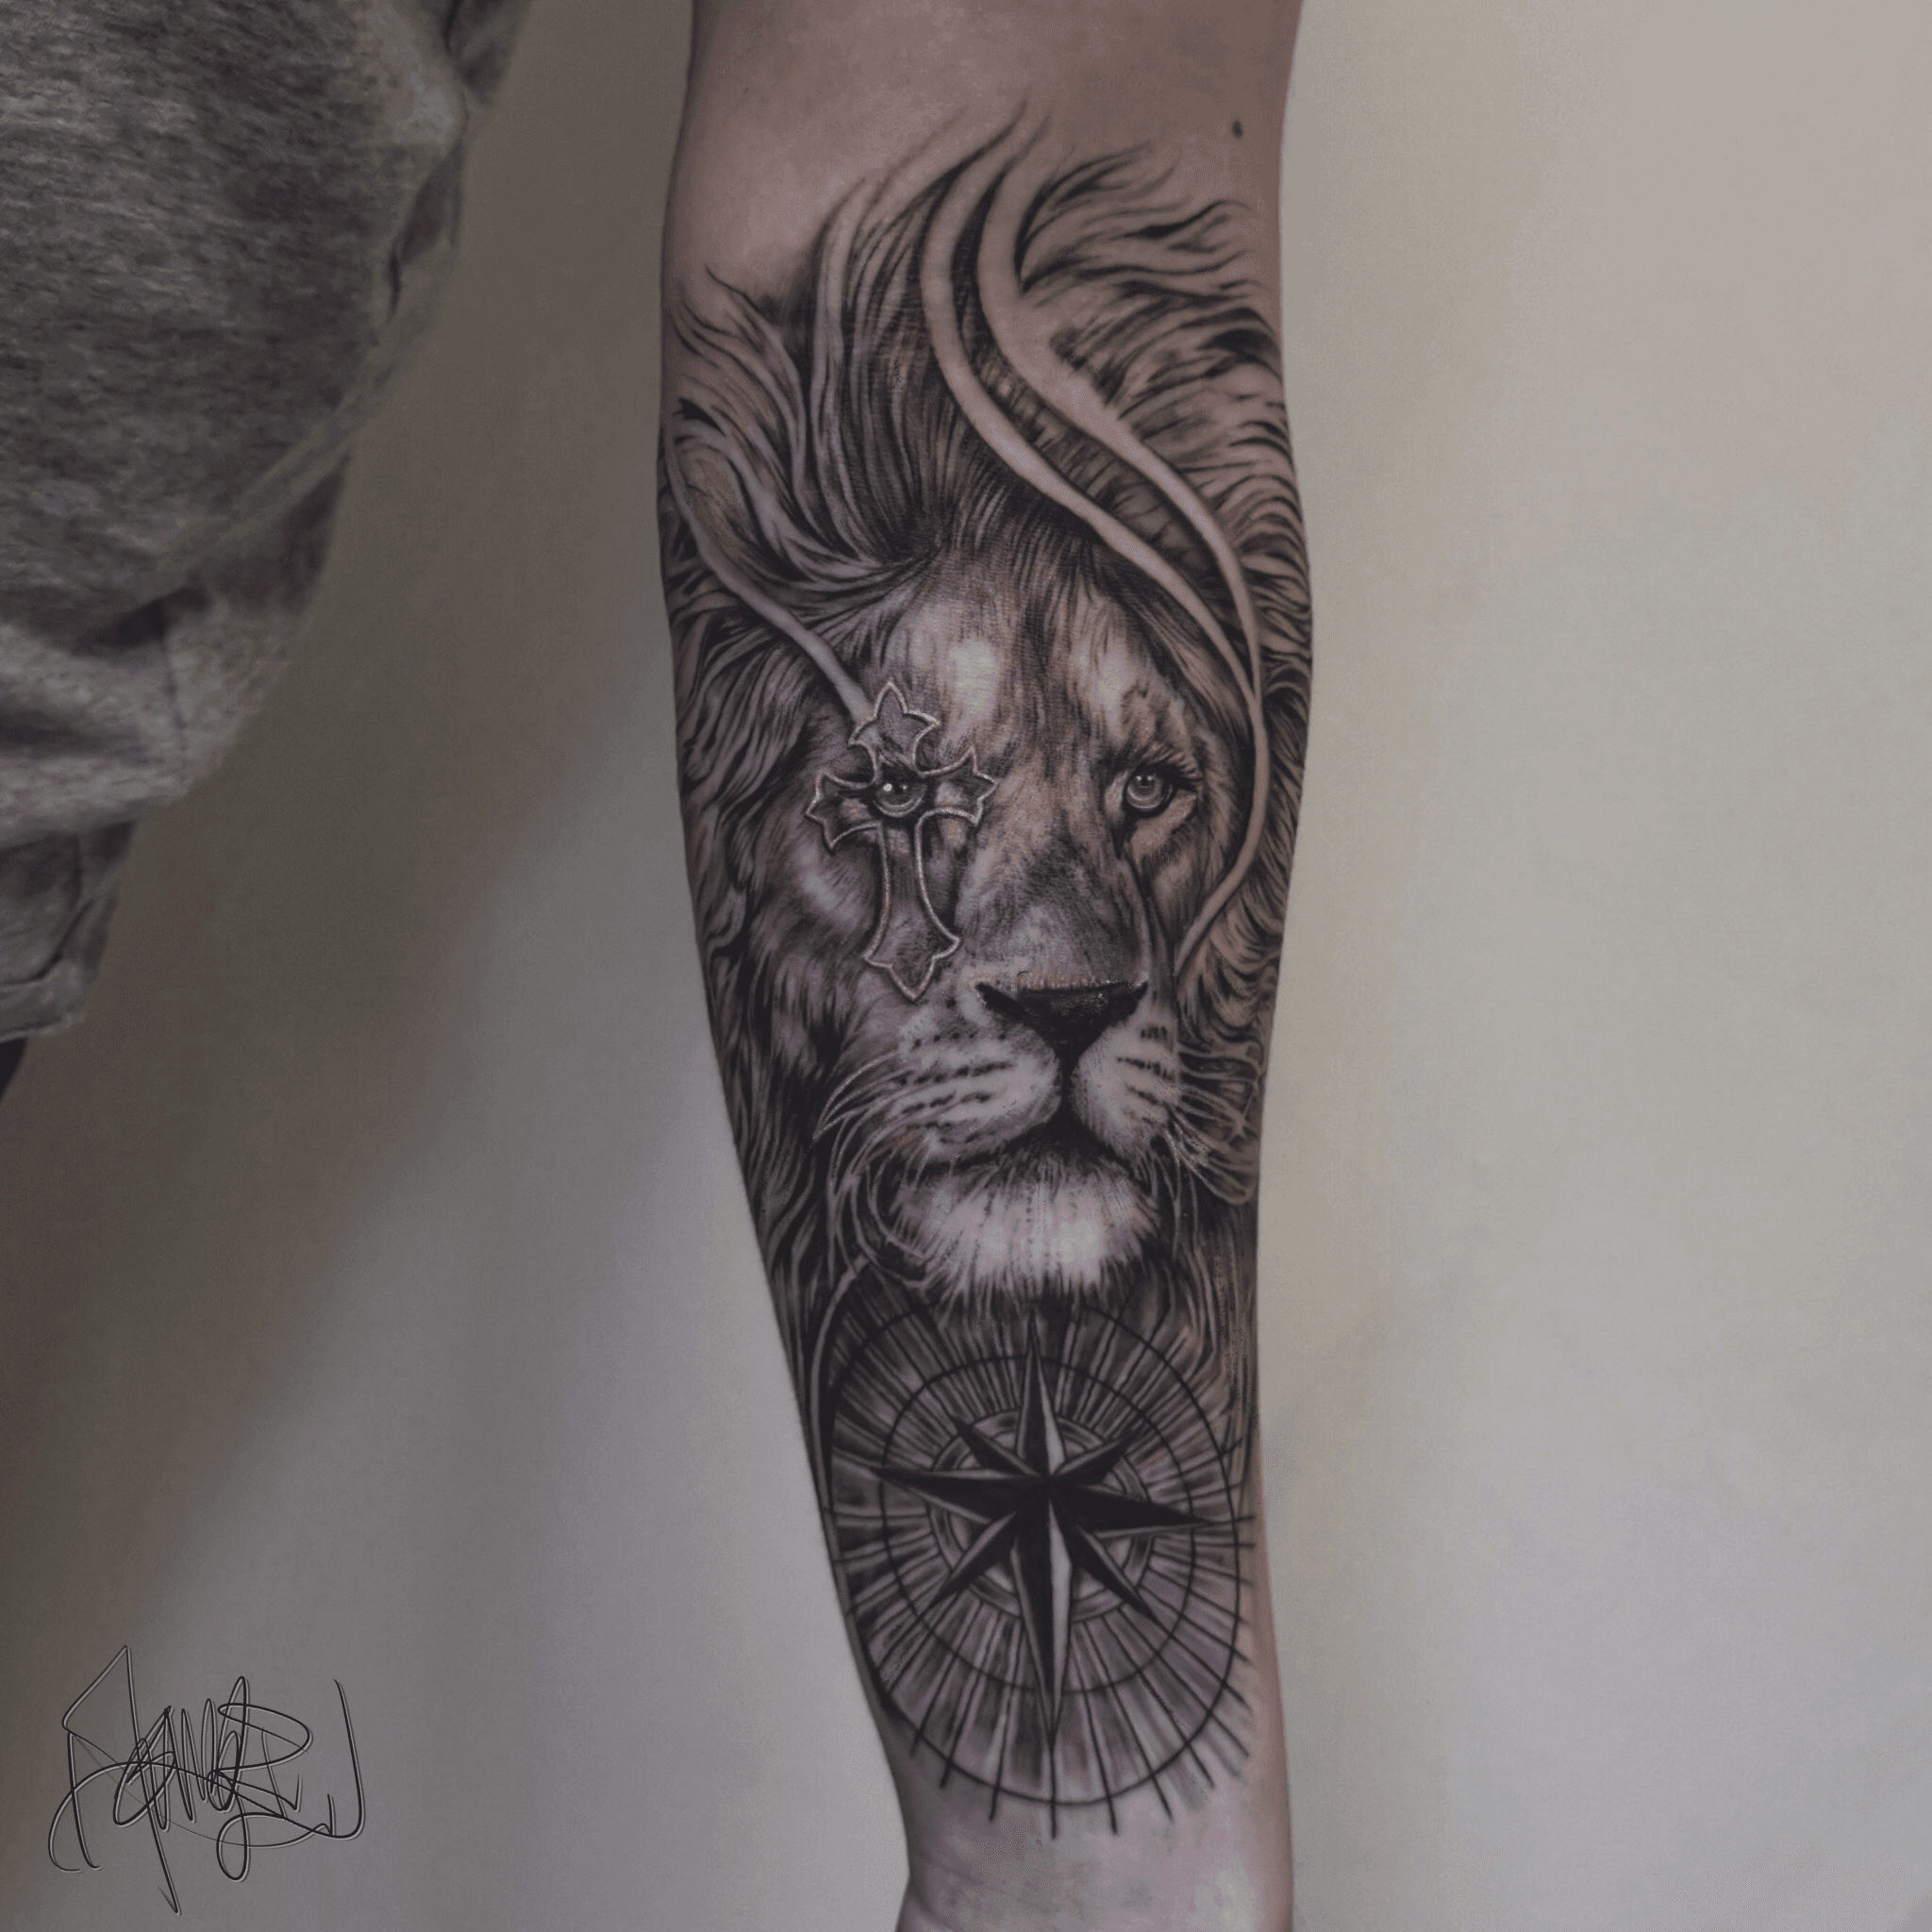 God Gold Tattoo Bali  Roaring Lion on forearm  BOOK YOUR SPOT OR GET  QUOTE DM US  godgoldtattoobali WALKINS WELCOMING   Done By Indra  indratattooist  At godgoldtattoobali godgoldtattoobali 